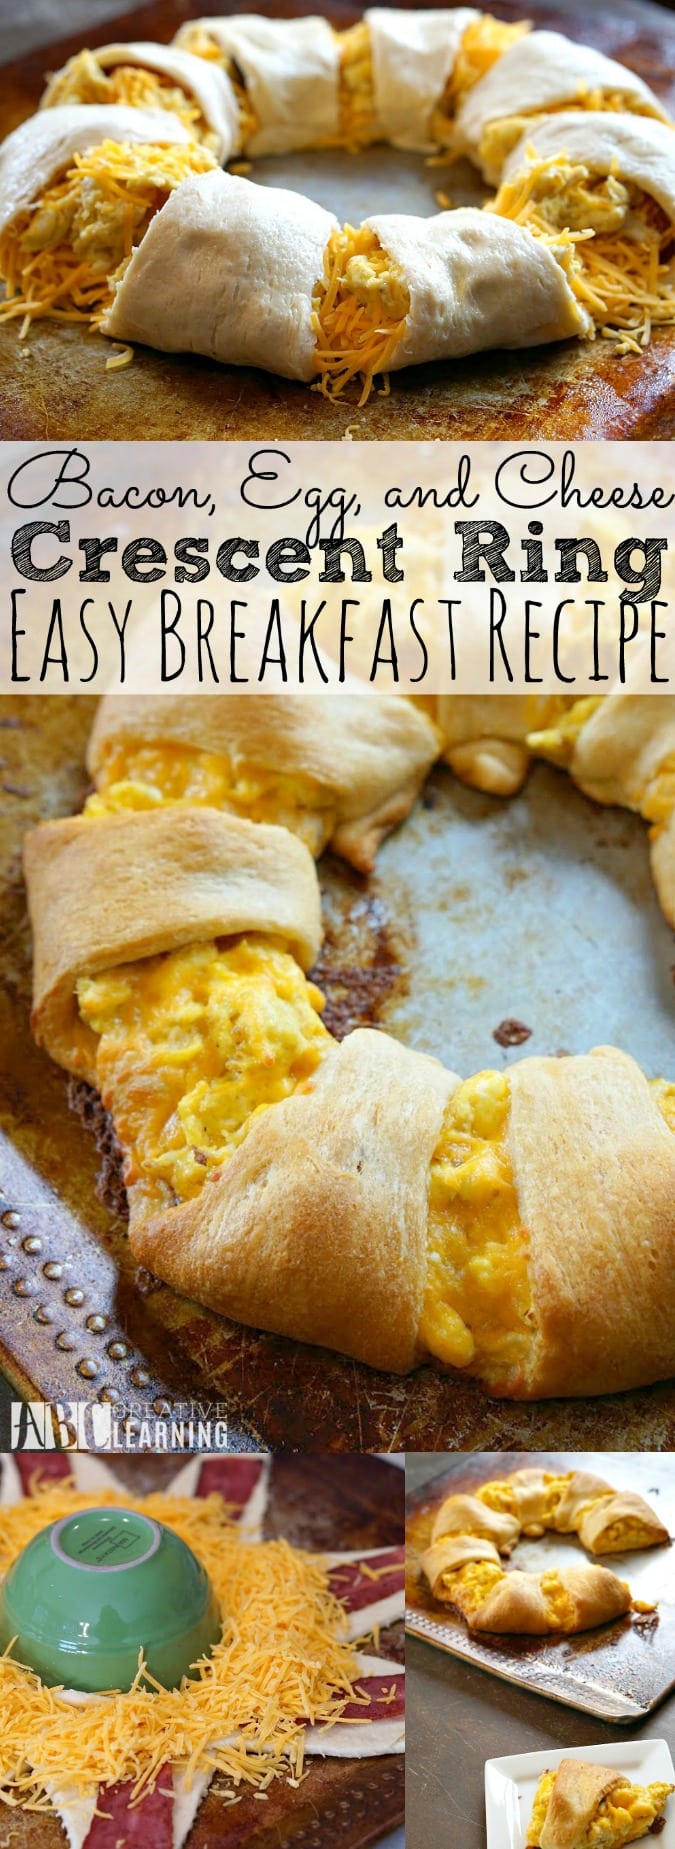 Bacon Egg and Cheese Crescent Breakfast